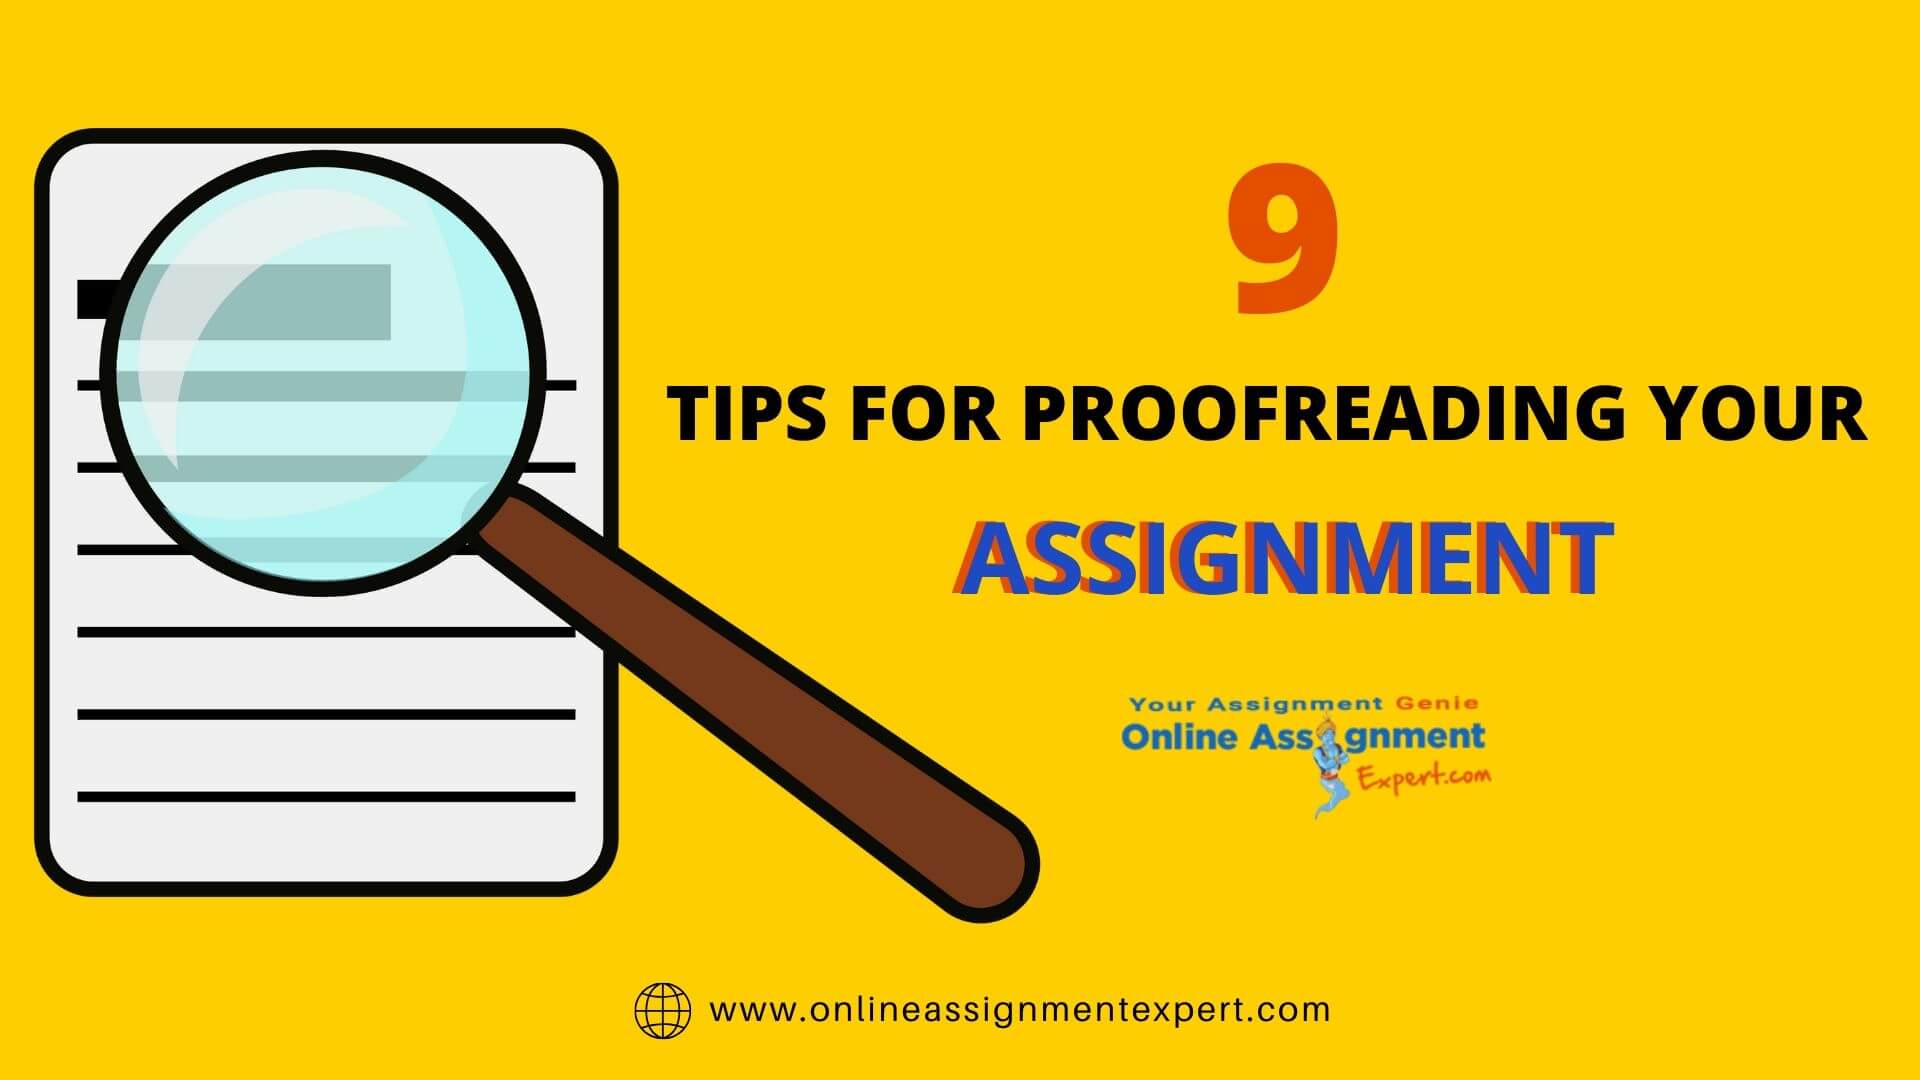 9 Great Tips for Proofreading Your Assignment